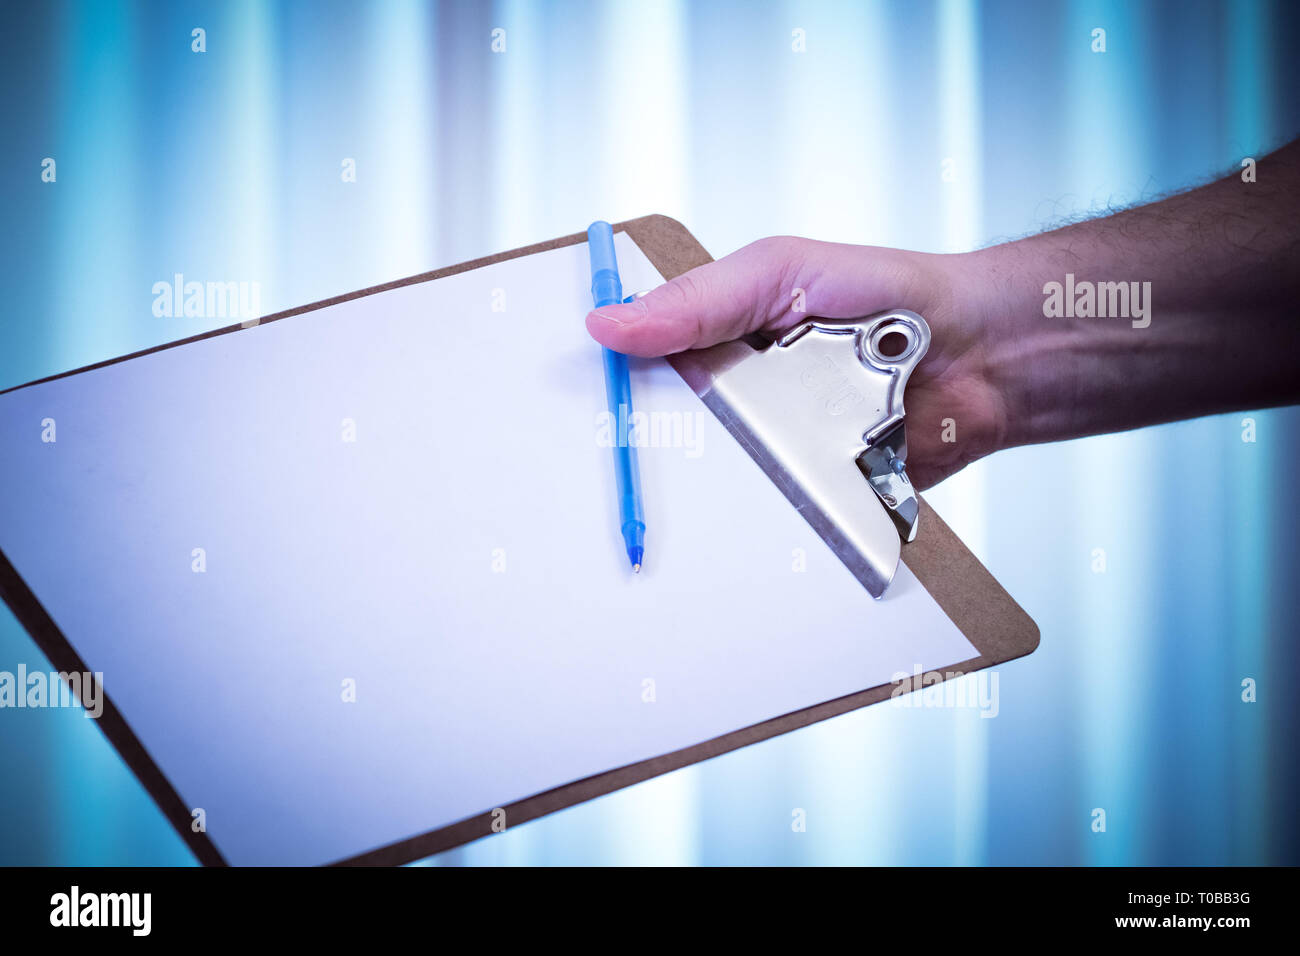 Handing out clipboard and pen to sign up names/signatures and fill out; blank paper, blue tone Stock Photo